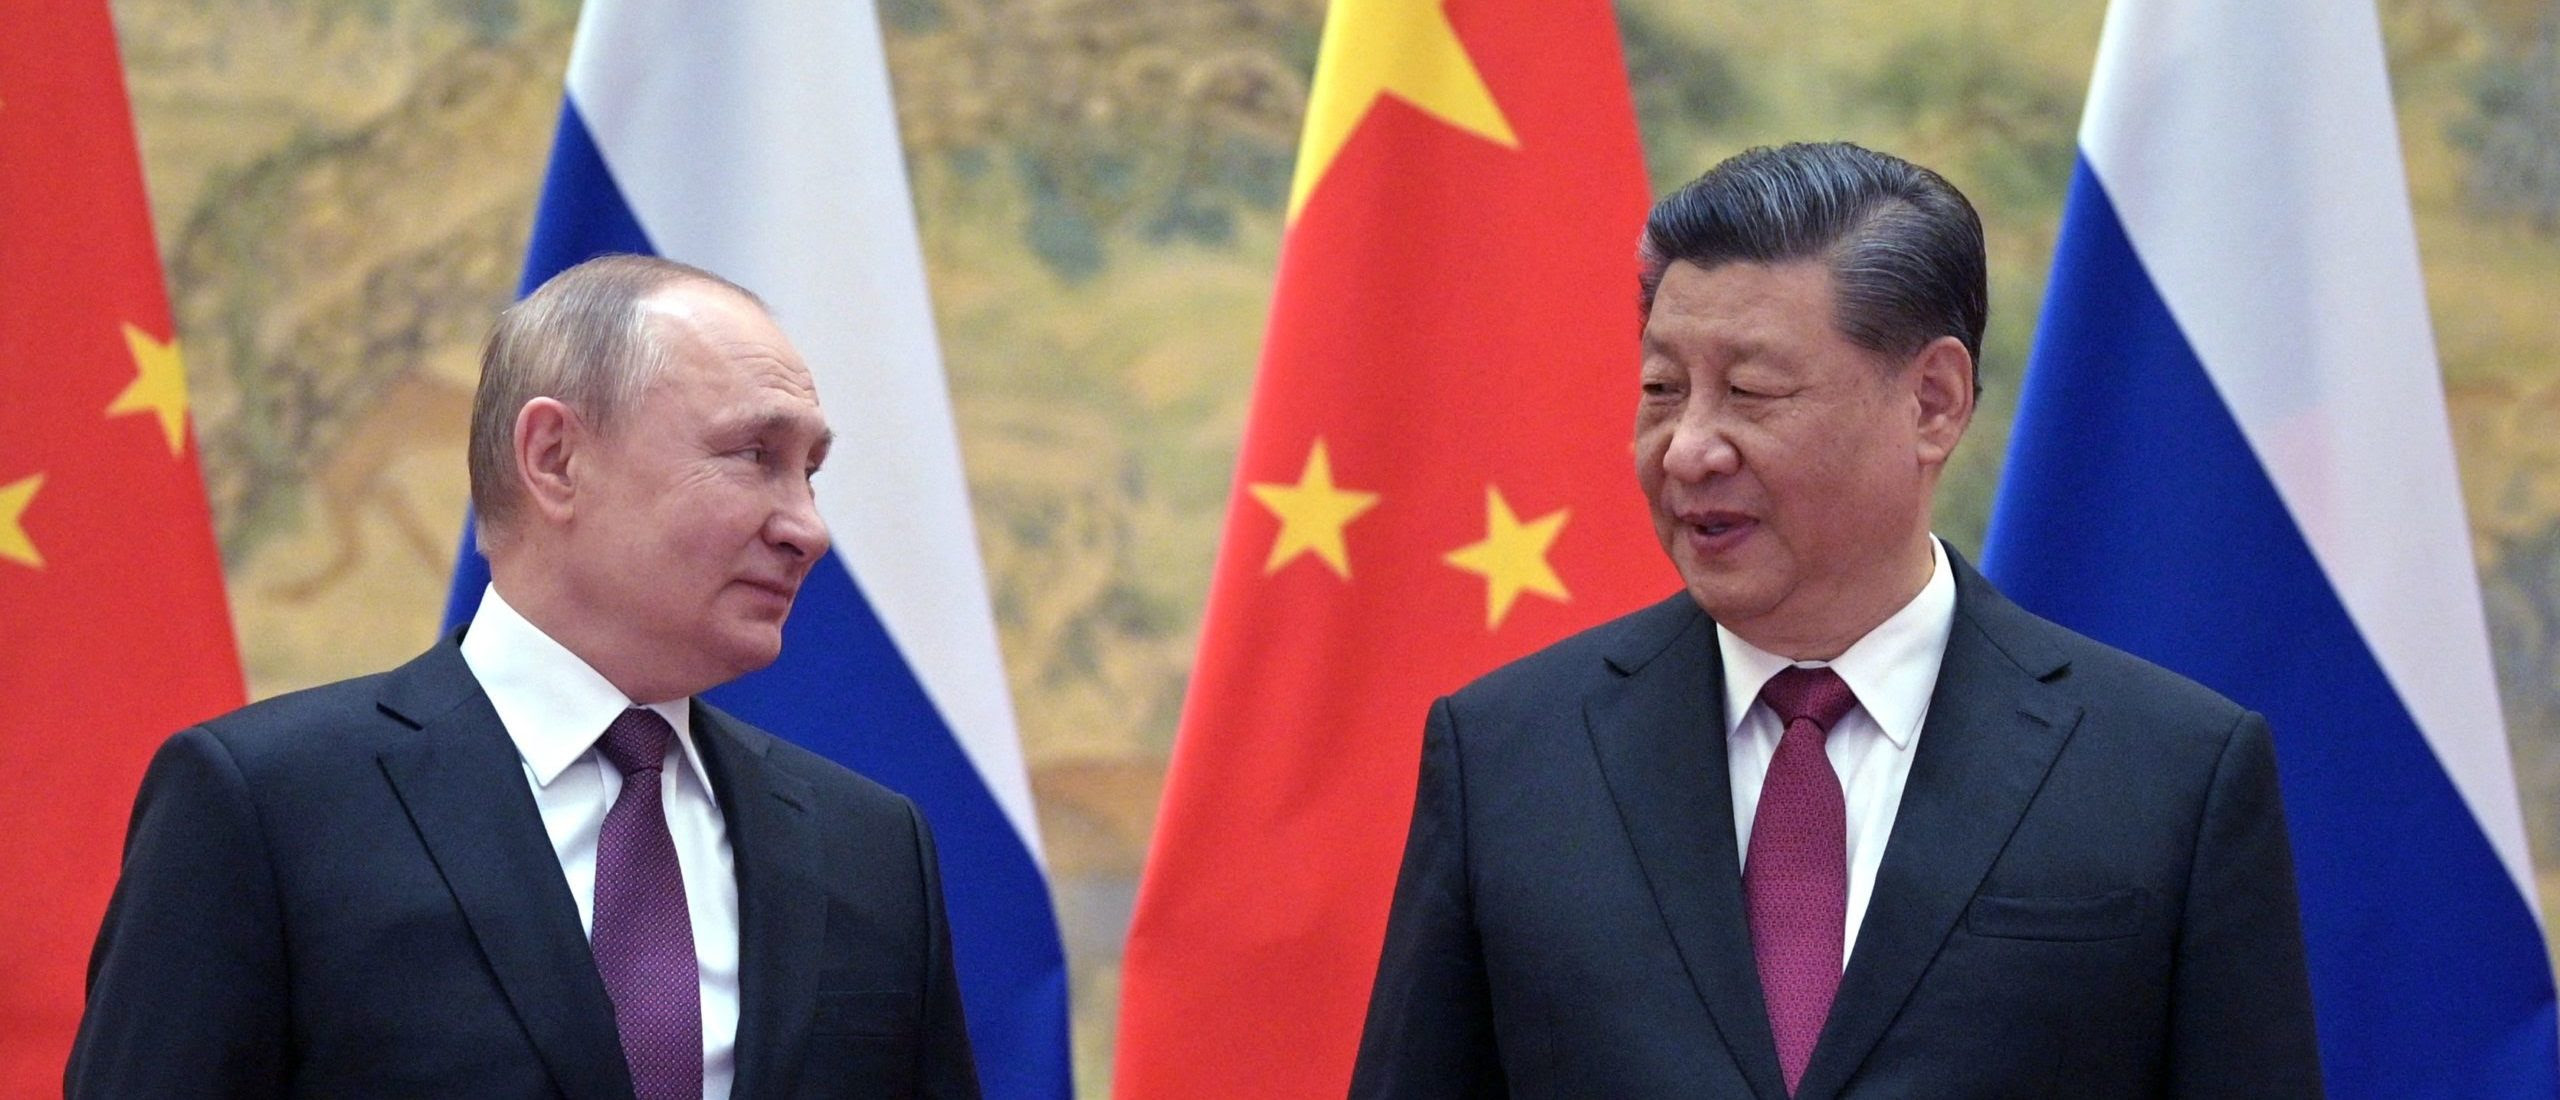 POLL: Americans Fear China’s Influence Over Russia’s